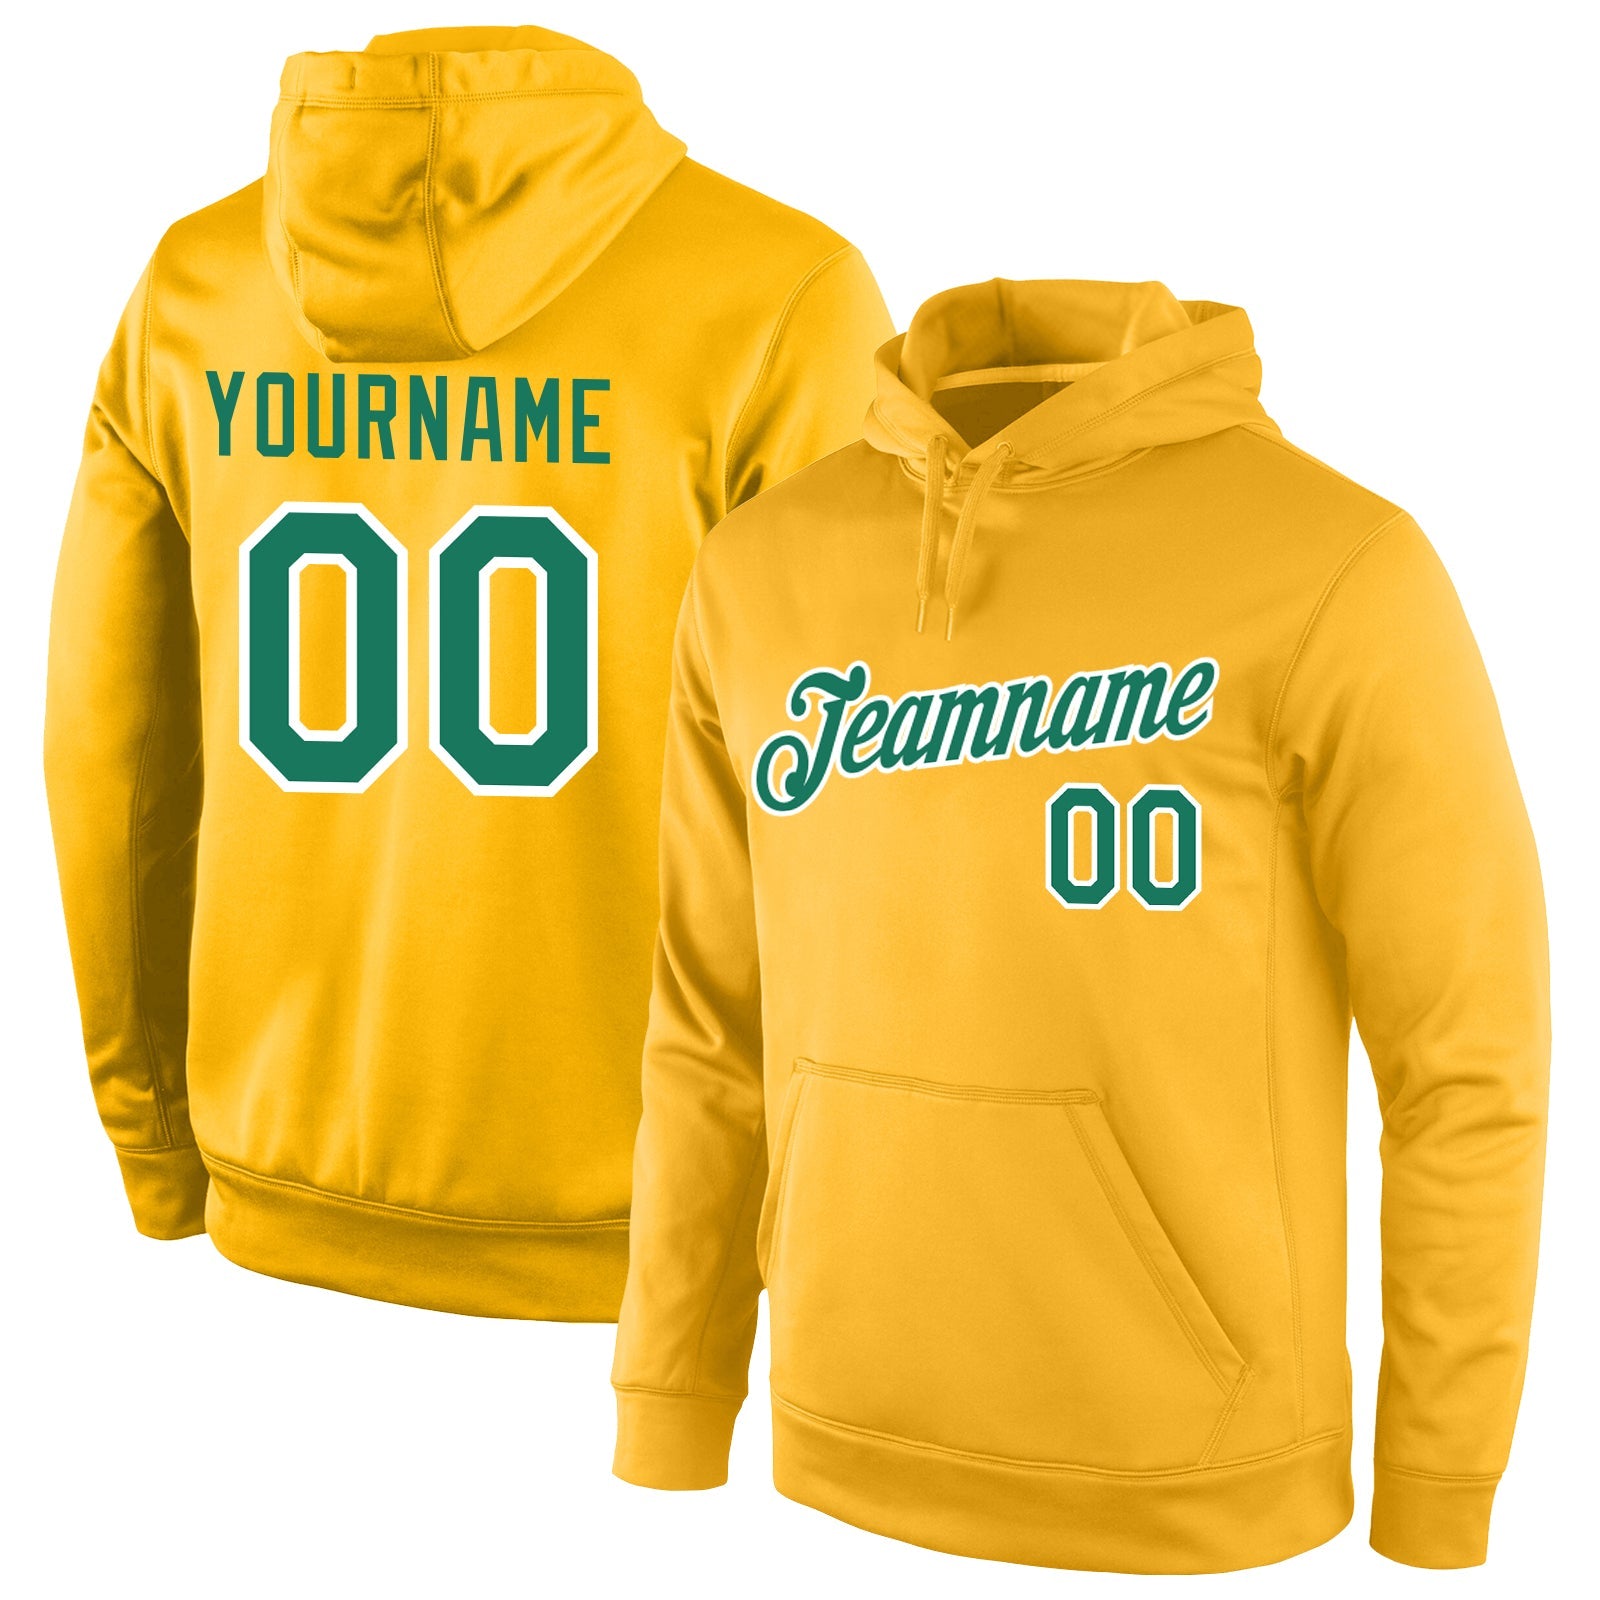 Custom Stitched Gold Kelly Green-White Sports Pullover Sweatshirt Hoodie